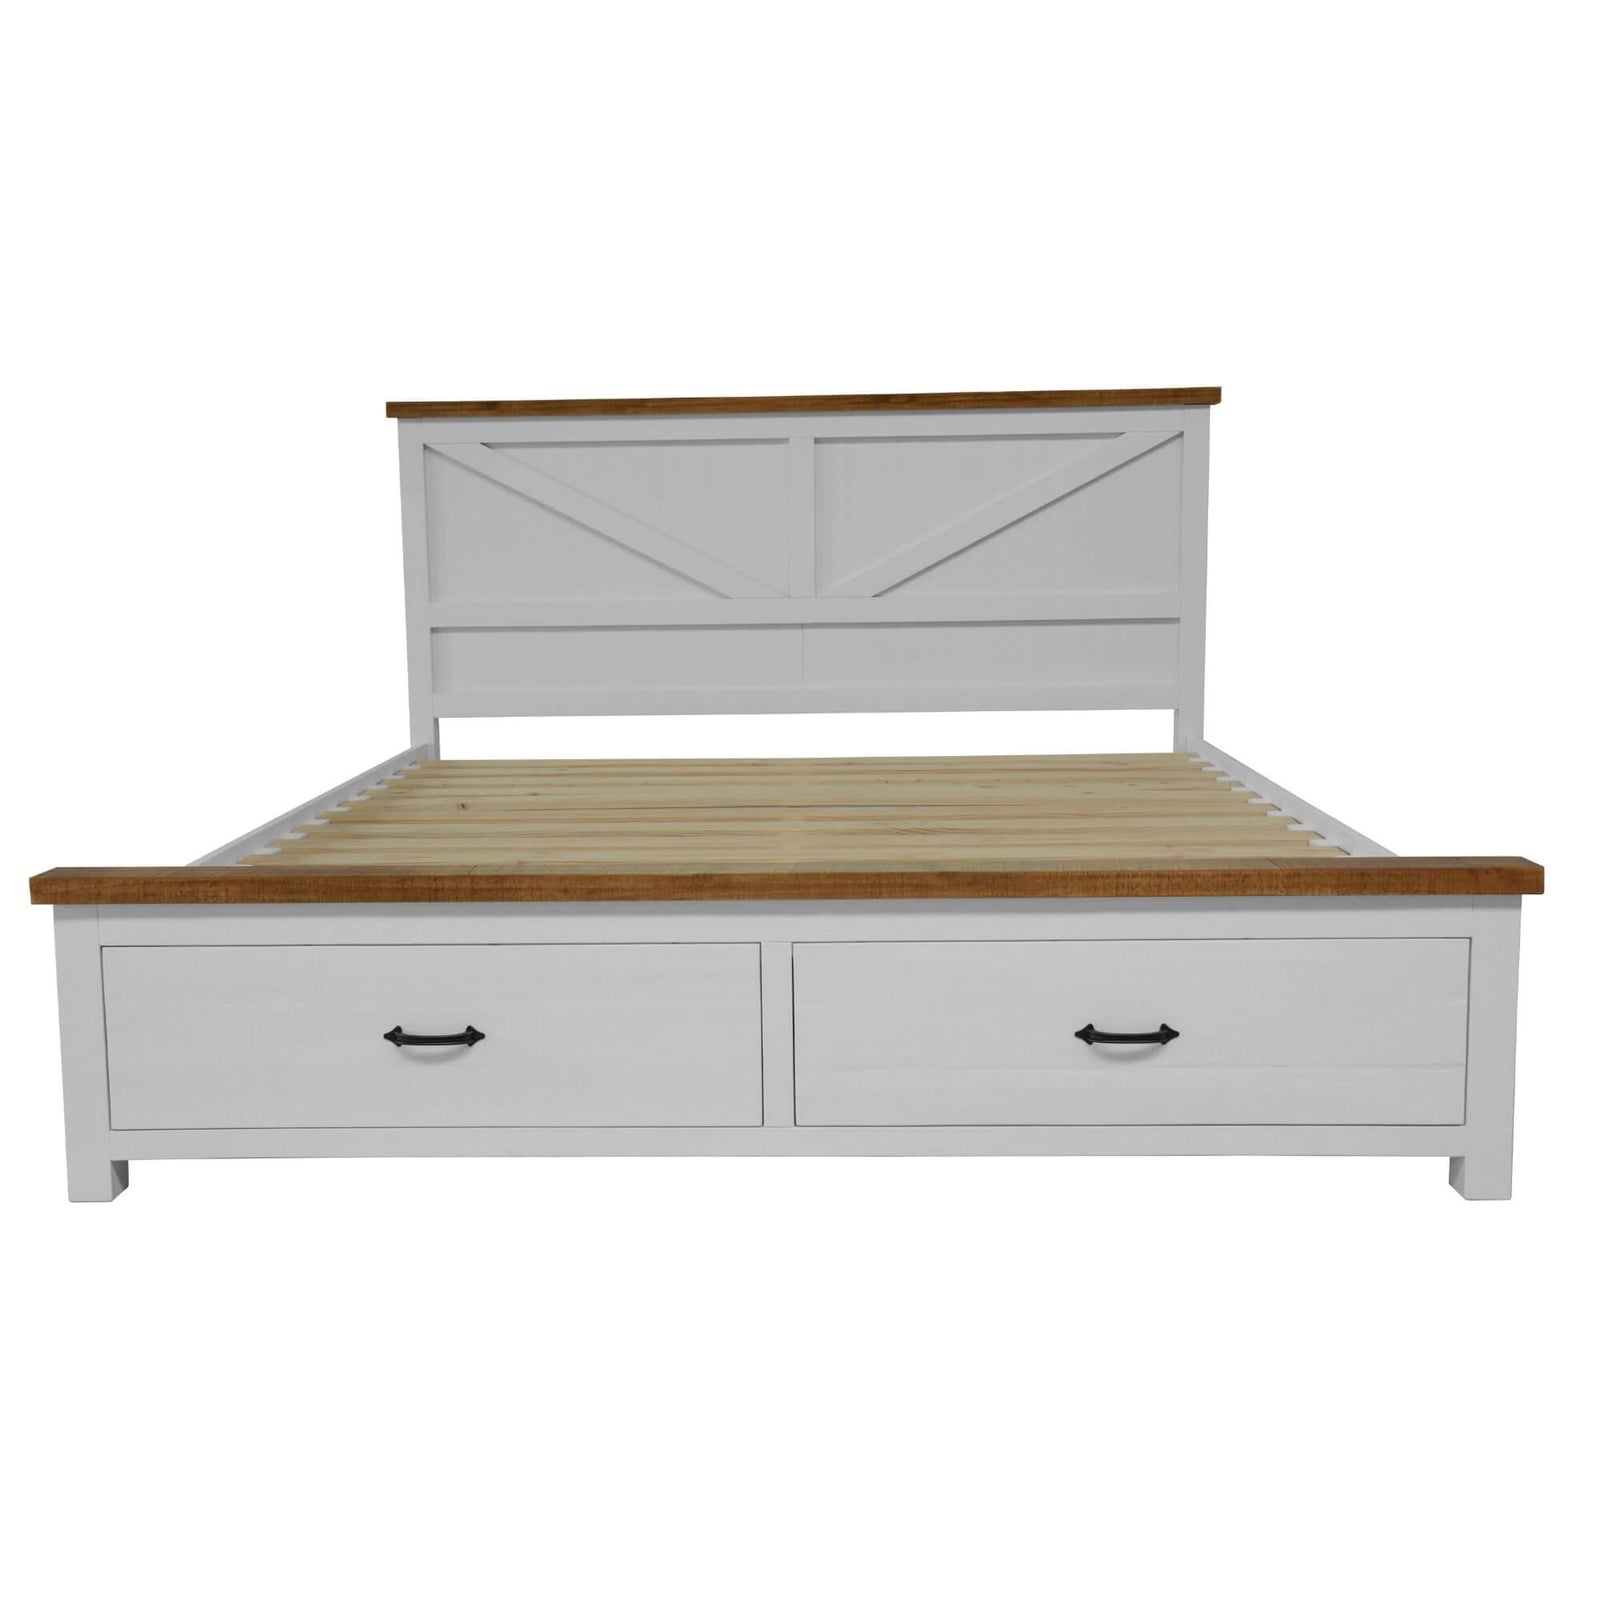 Grandy Bed Frame Quen Size Timber Mattress Base With Storage Drawer White Brown-Upinteriors